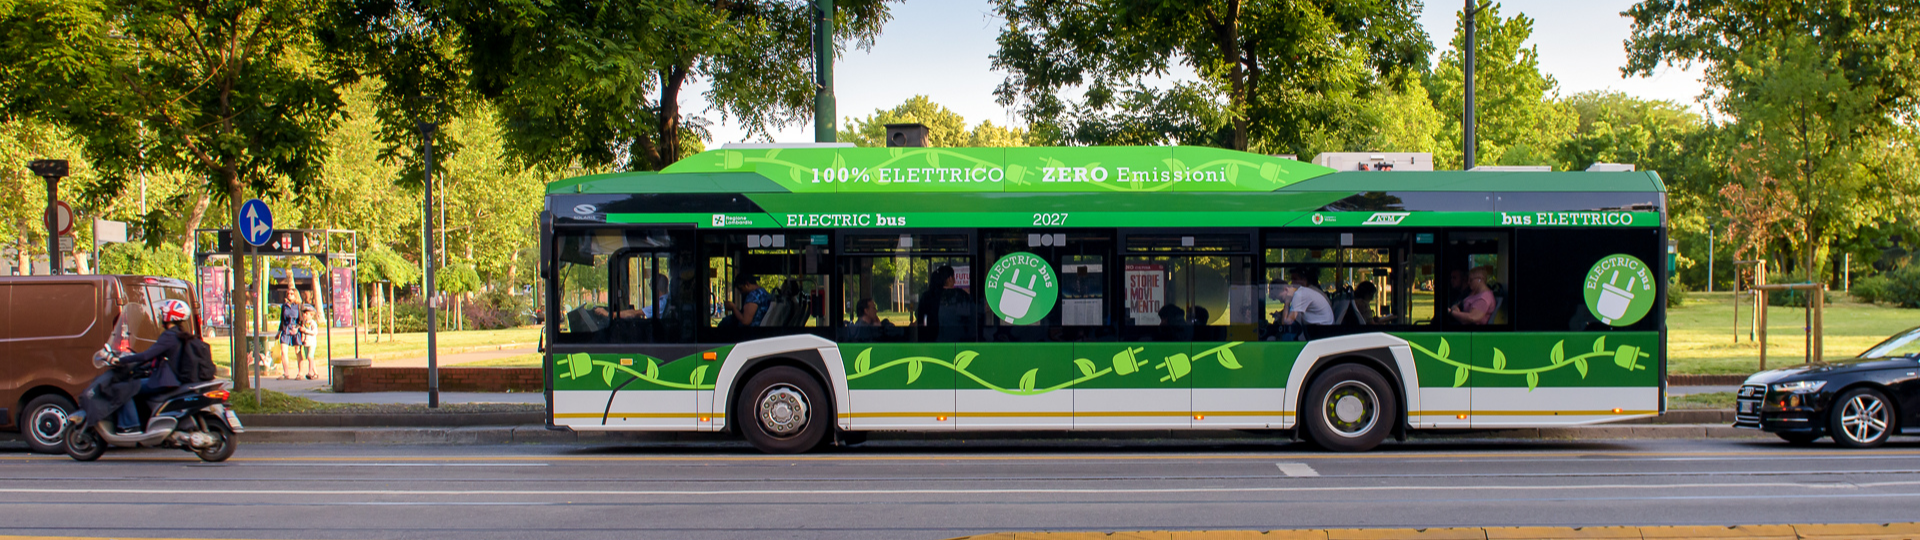 Milan orders another 100 Urbino 12 electric buses. The 1000th electric Solaris bus is among them!